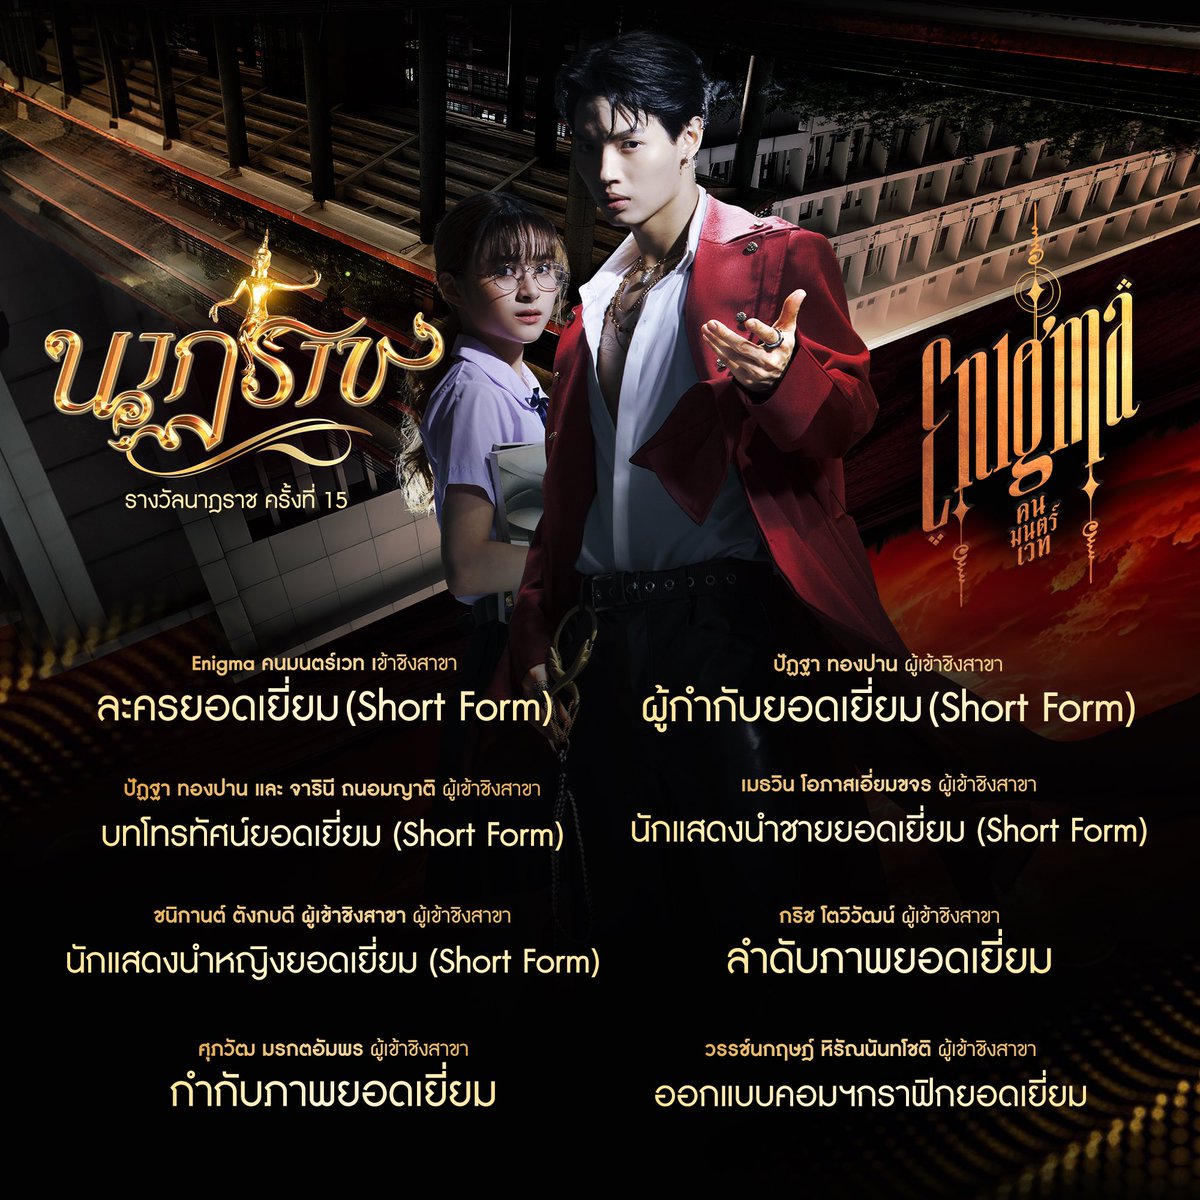 #EnigmaSeries nominated for Nataraja Awards in 8 categories

Best Actor
Best Actress
Best Drama
Best Director
Best Cinematography
Best Screenplay
Best Editing
Best Visual Effects

WIN AT NATARAJA AWARDS
#นาฏราชครั้งที่15xWin
#นาฏราชครั้งที่15